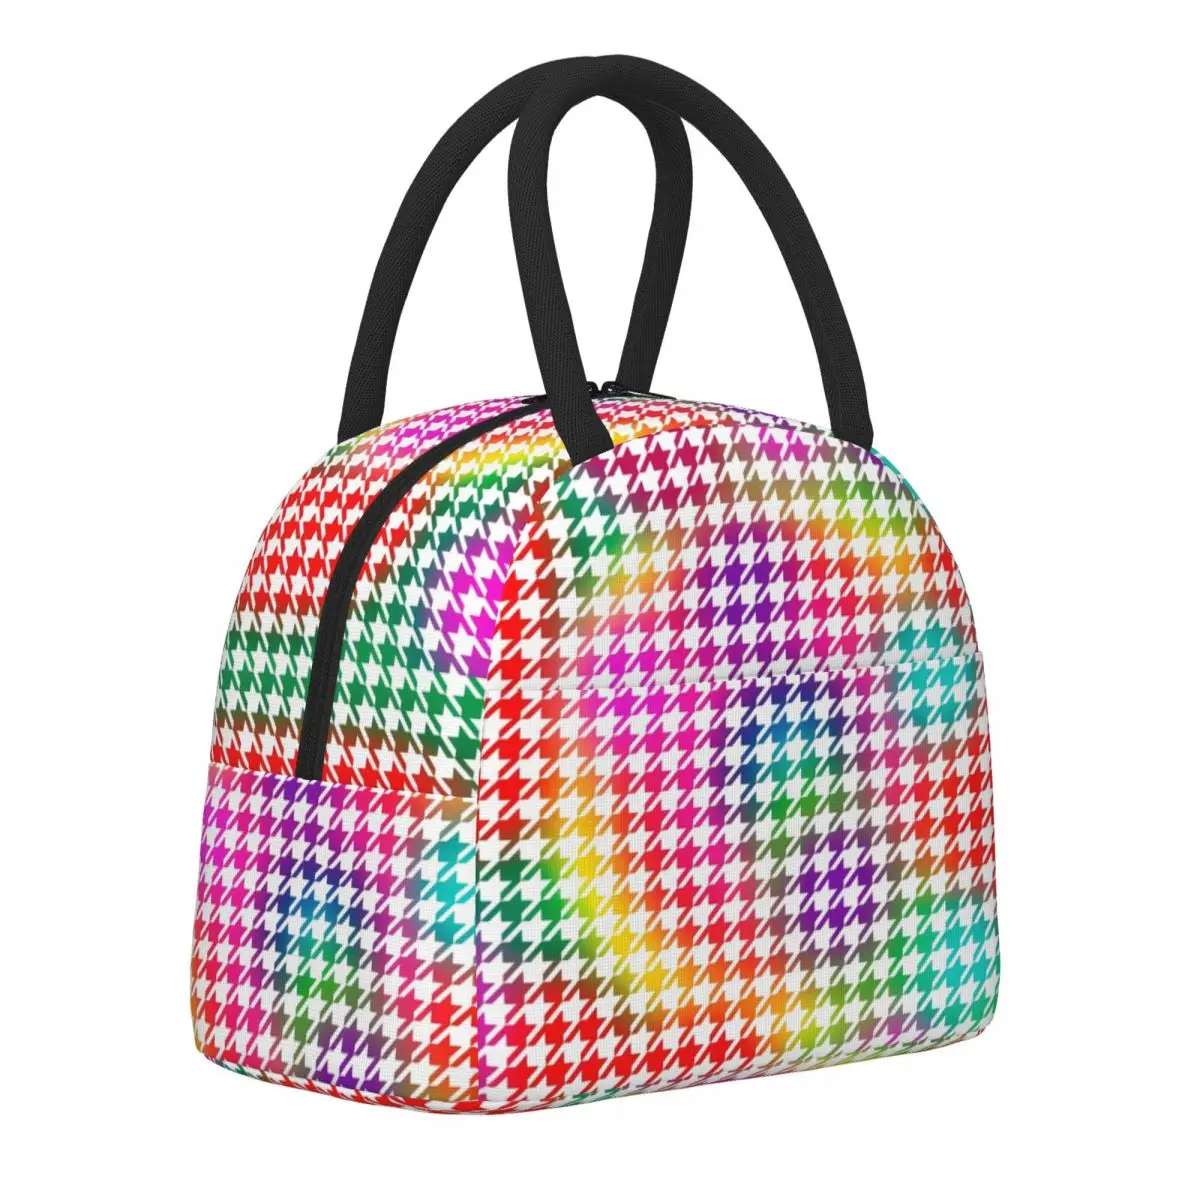 

Houndstooth Psychedelic Lunch Bag Colorful Print Portable Lunch Box Travel Print Cooler Bag Fashion Oxford Tote Food Bags